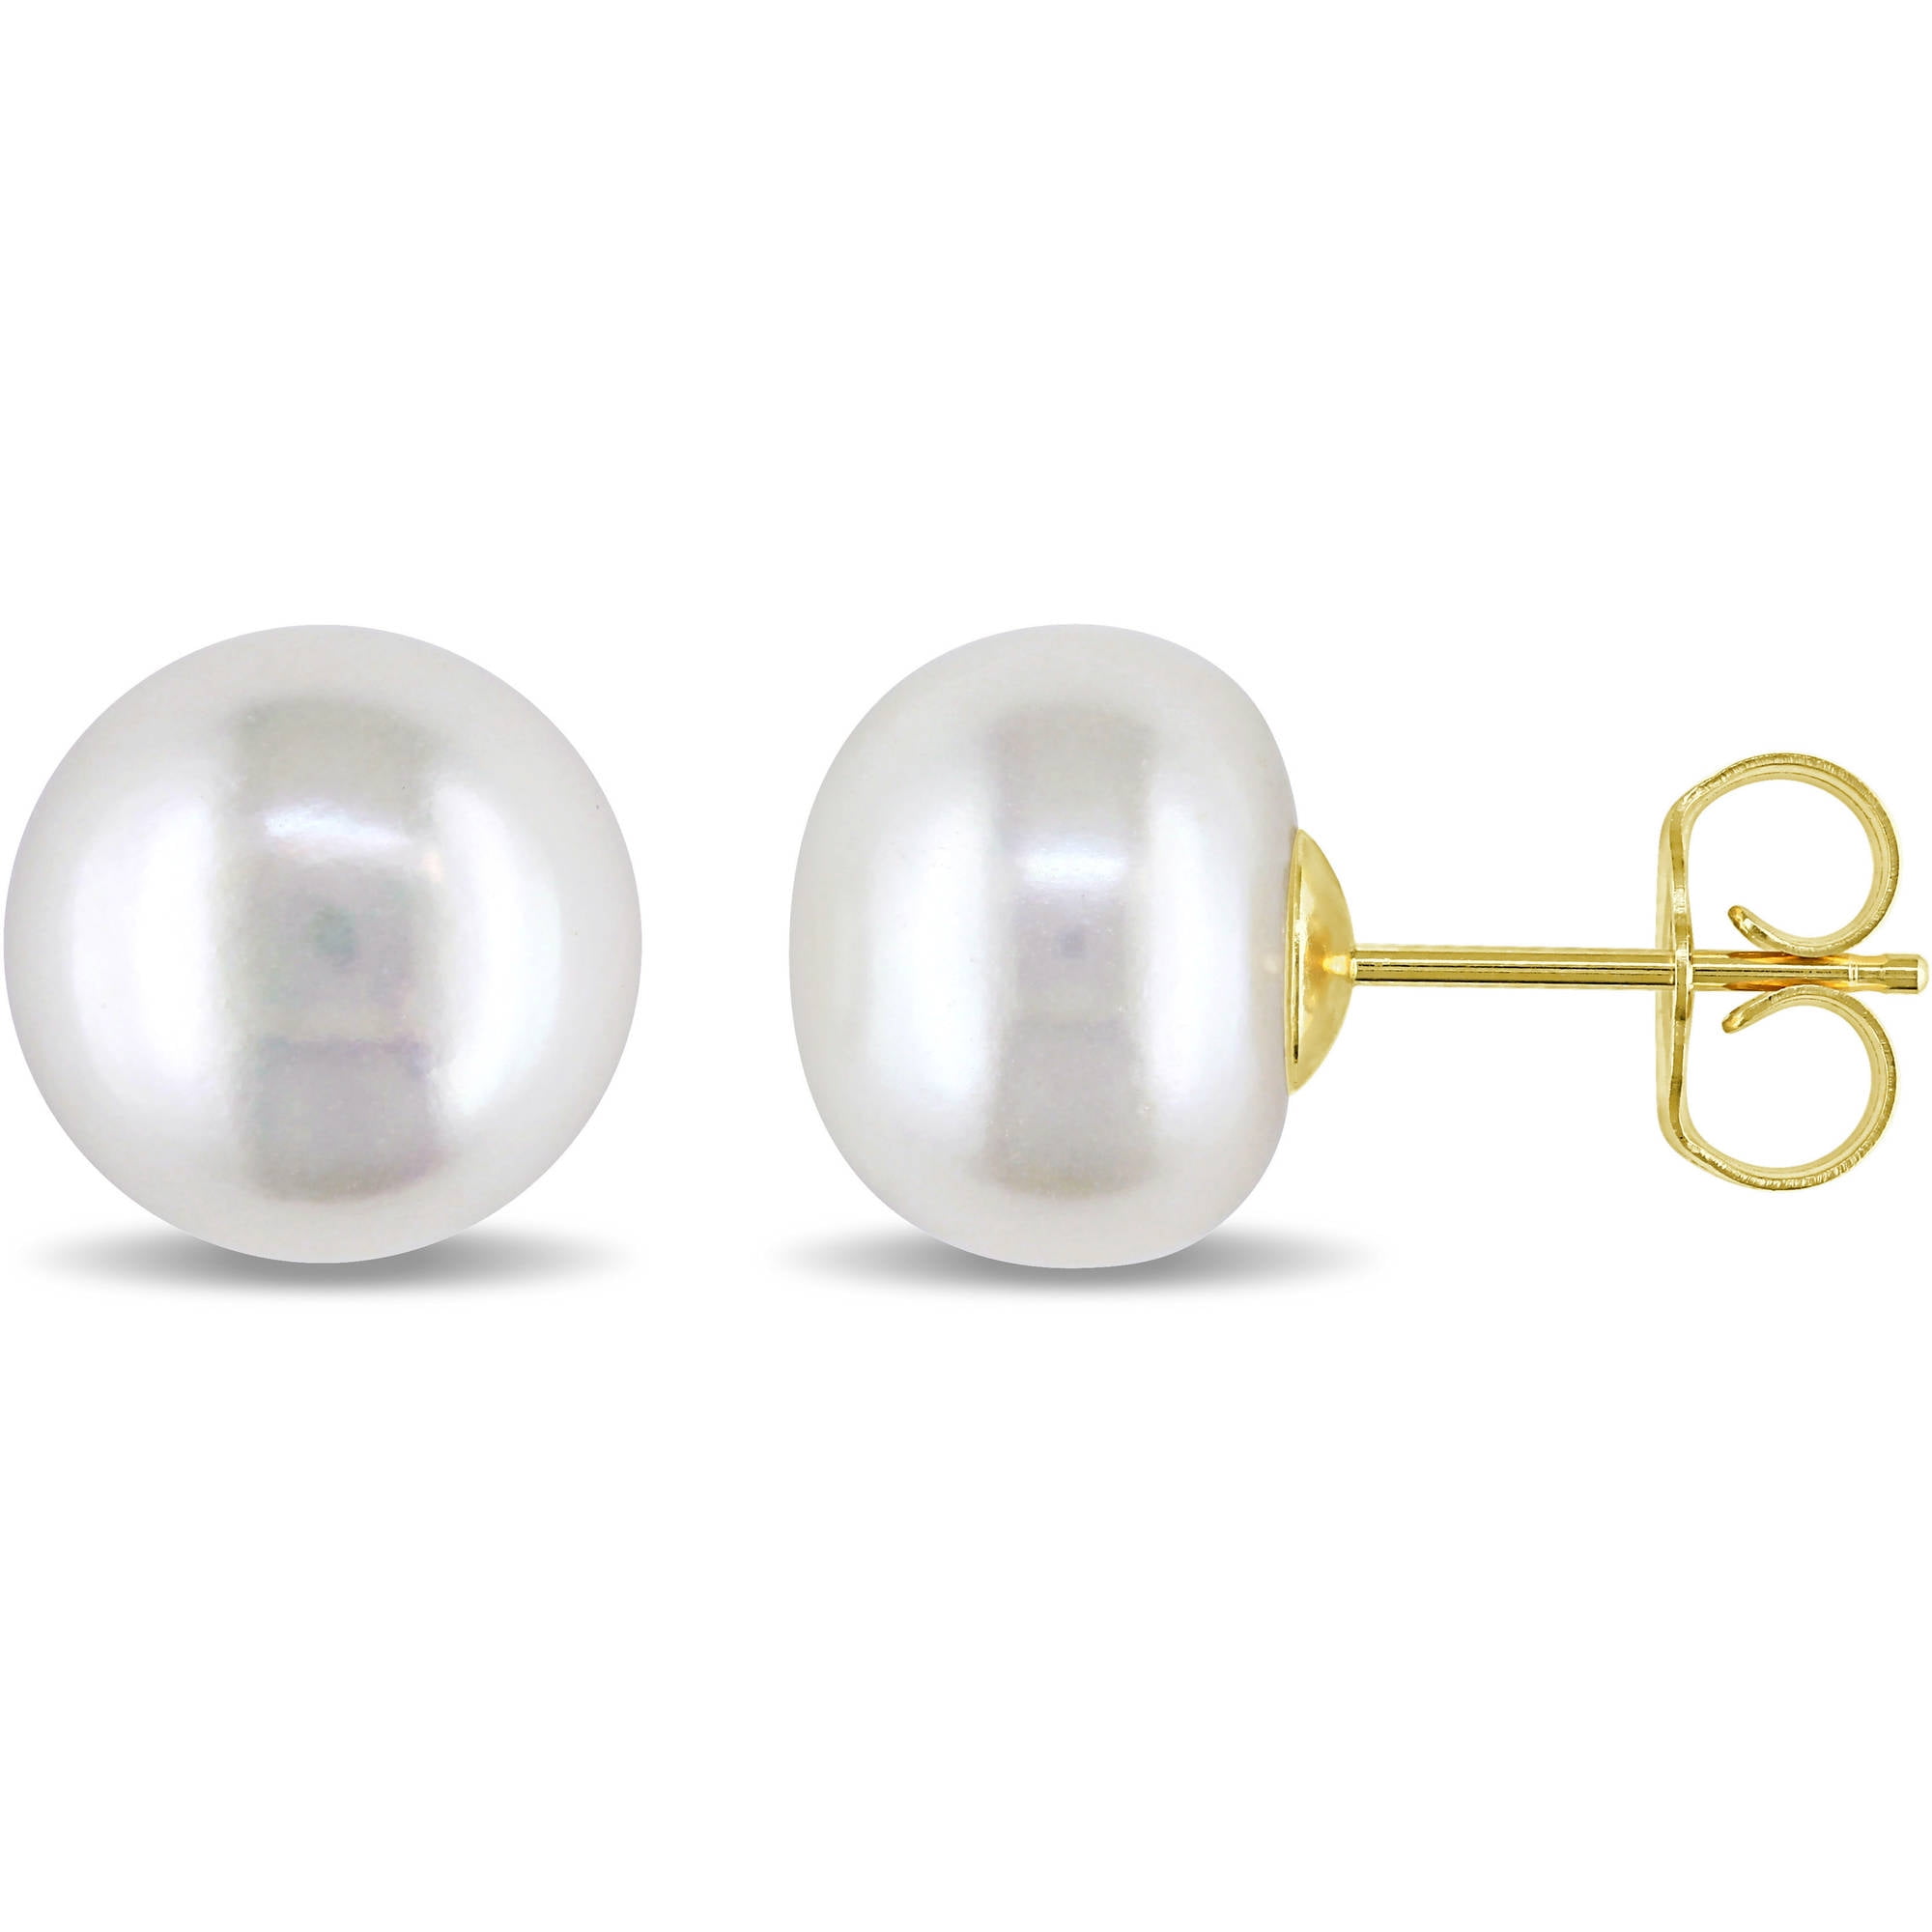 Details about   14K Yellow Gold 11-12MM White Button Cultured Pearl Stud Post Earrings MSRP $78 